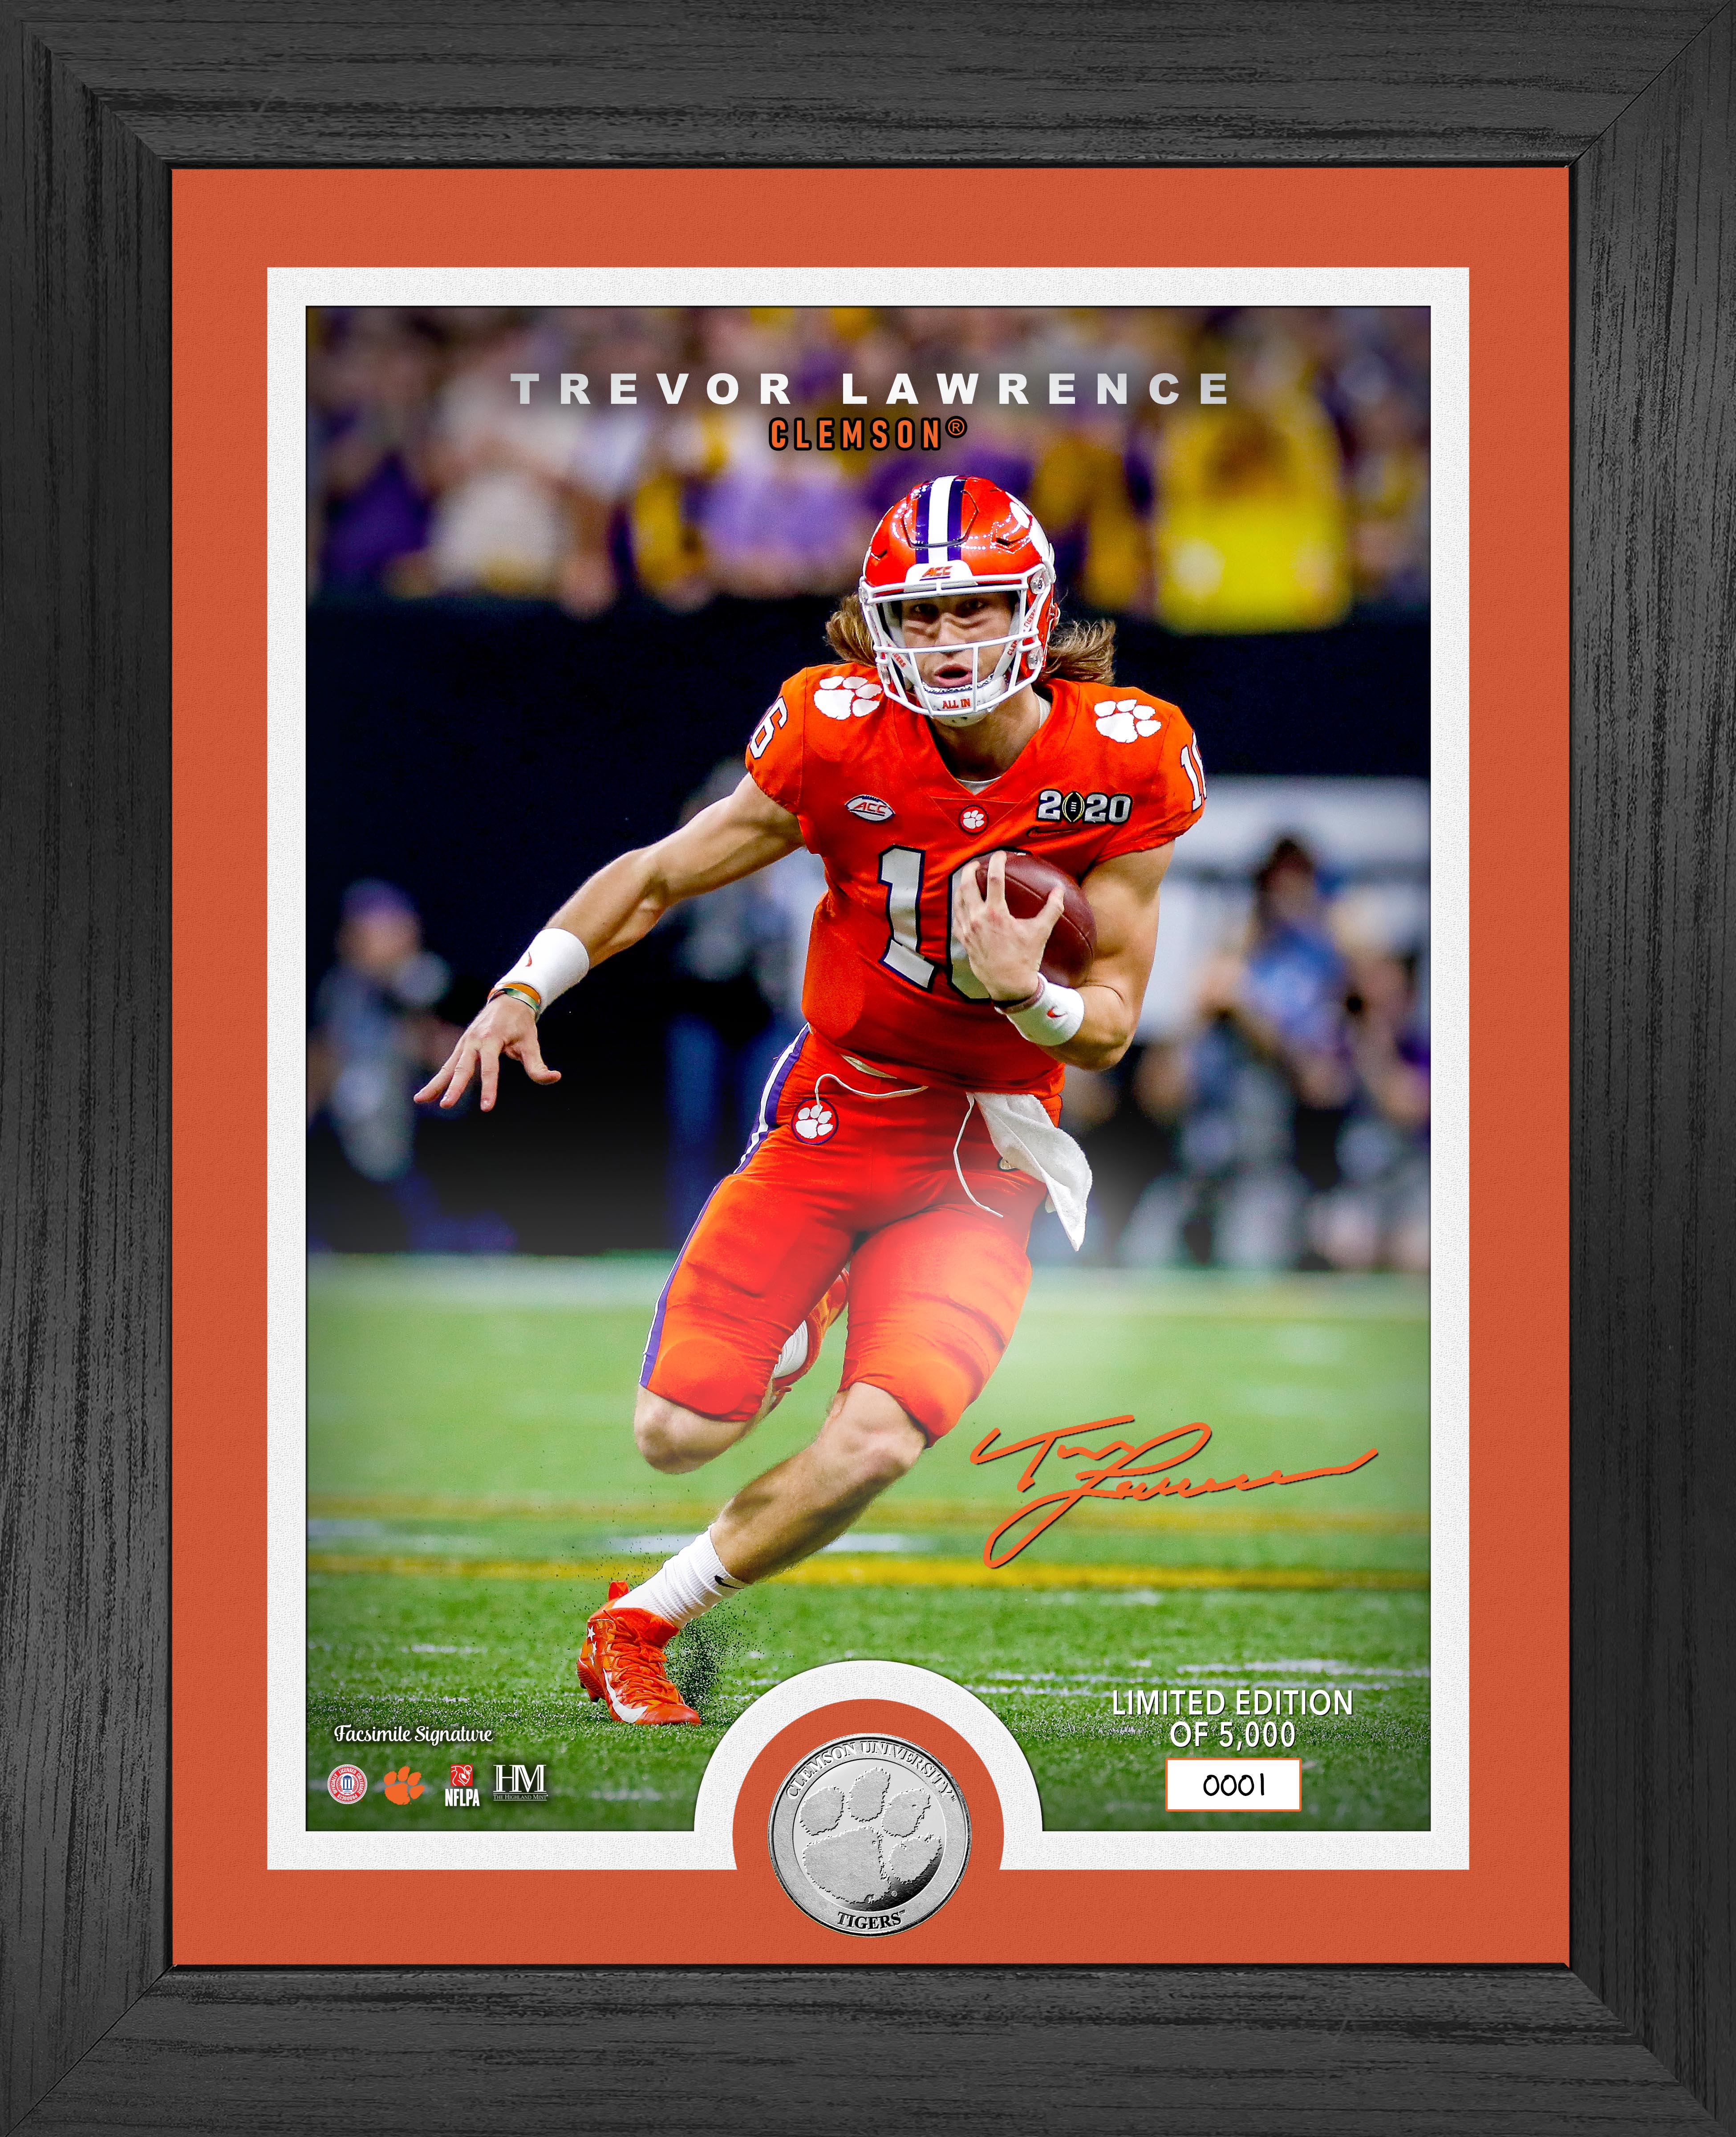 Trevor Lawrence Clemson Tigers Silver Coin Photo Mint